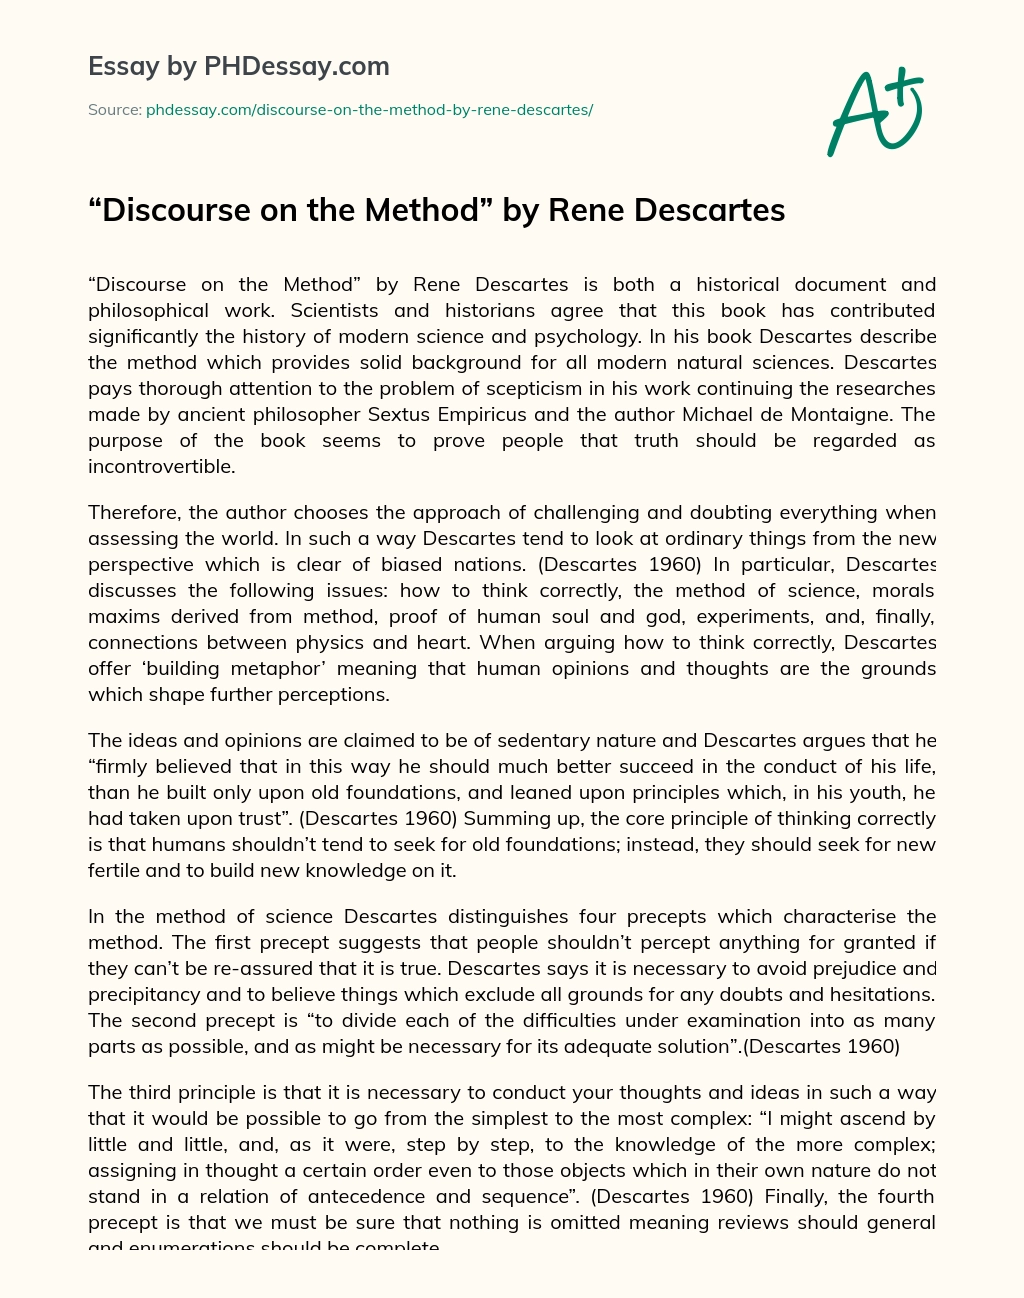 Discourse on the Method by Rene Descartes essay